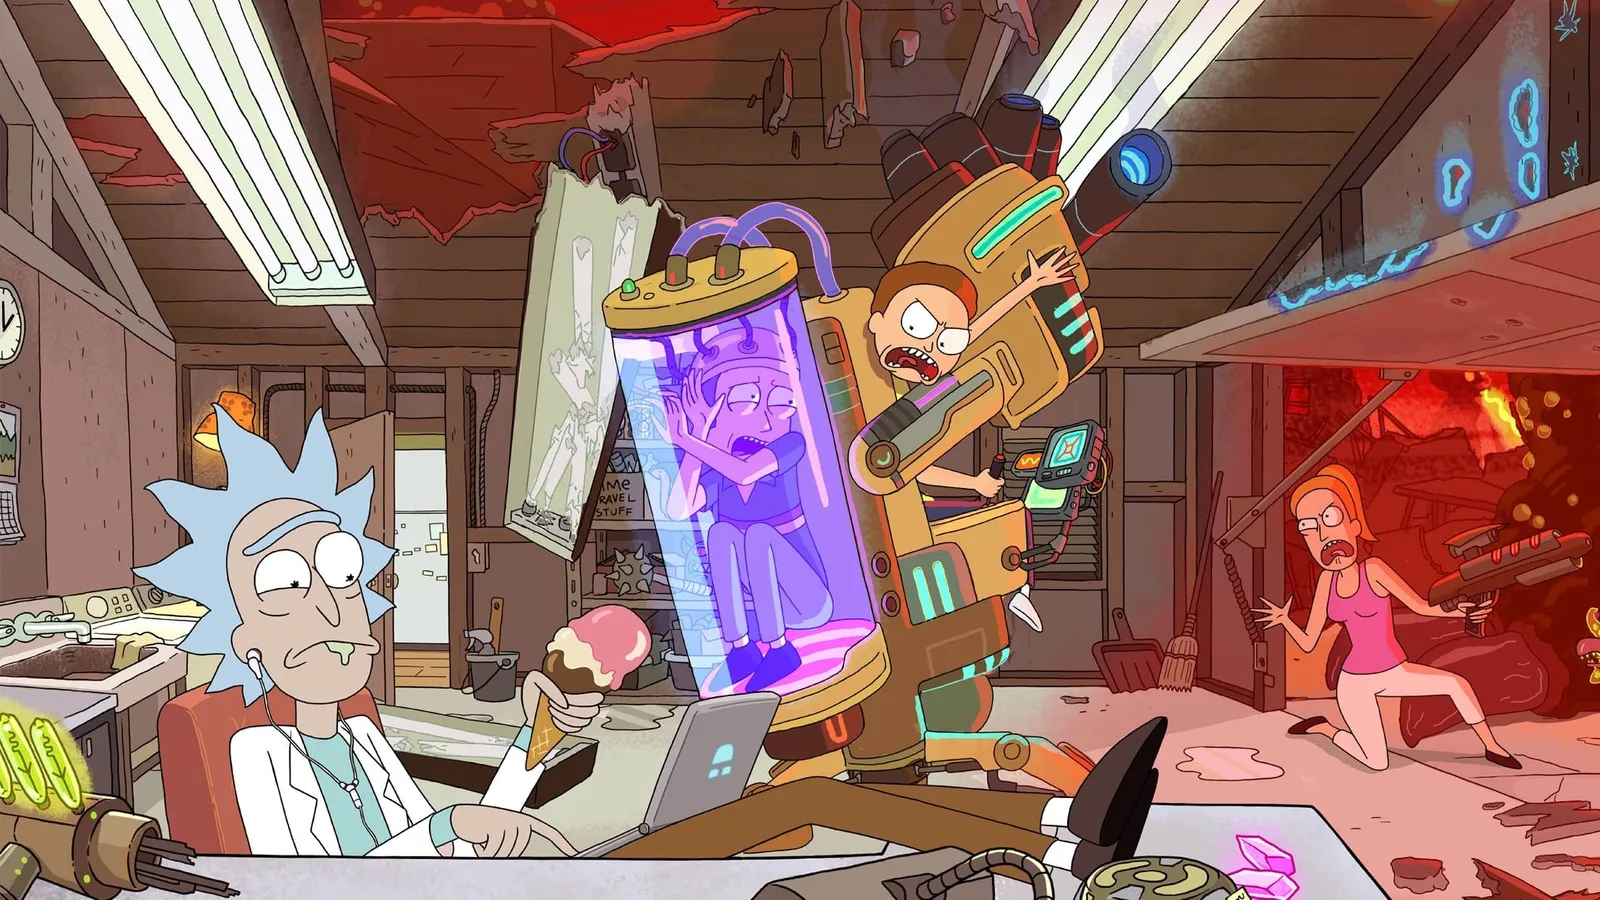 Rick and Morty - Season 5 Episode 6 : Rick and Morty's Thanksploitation Spectacular